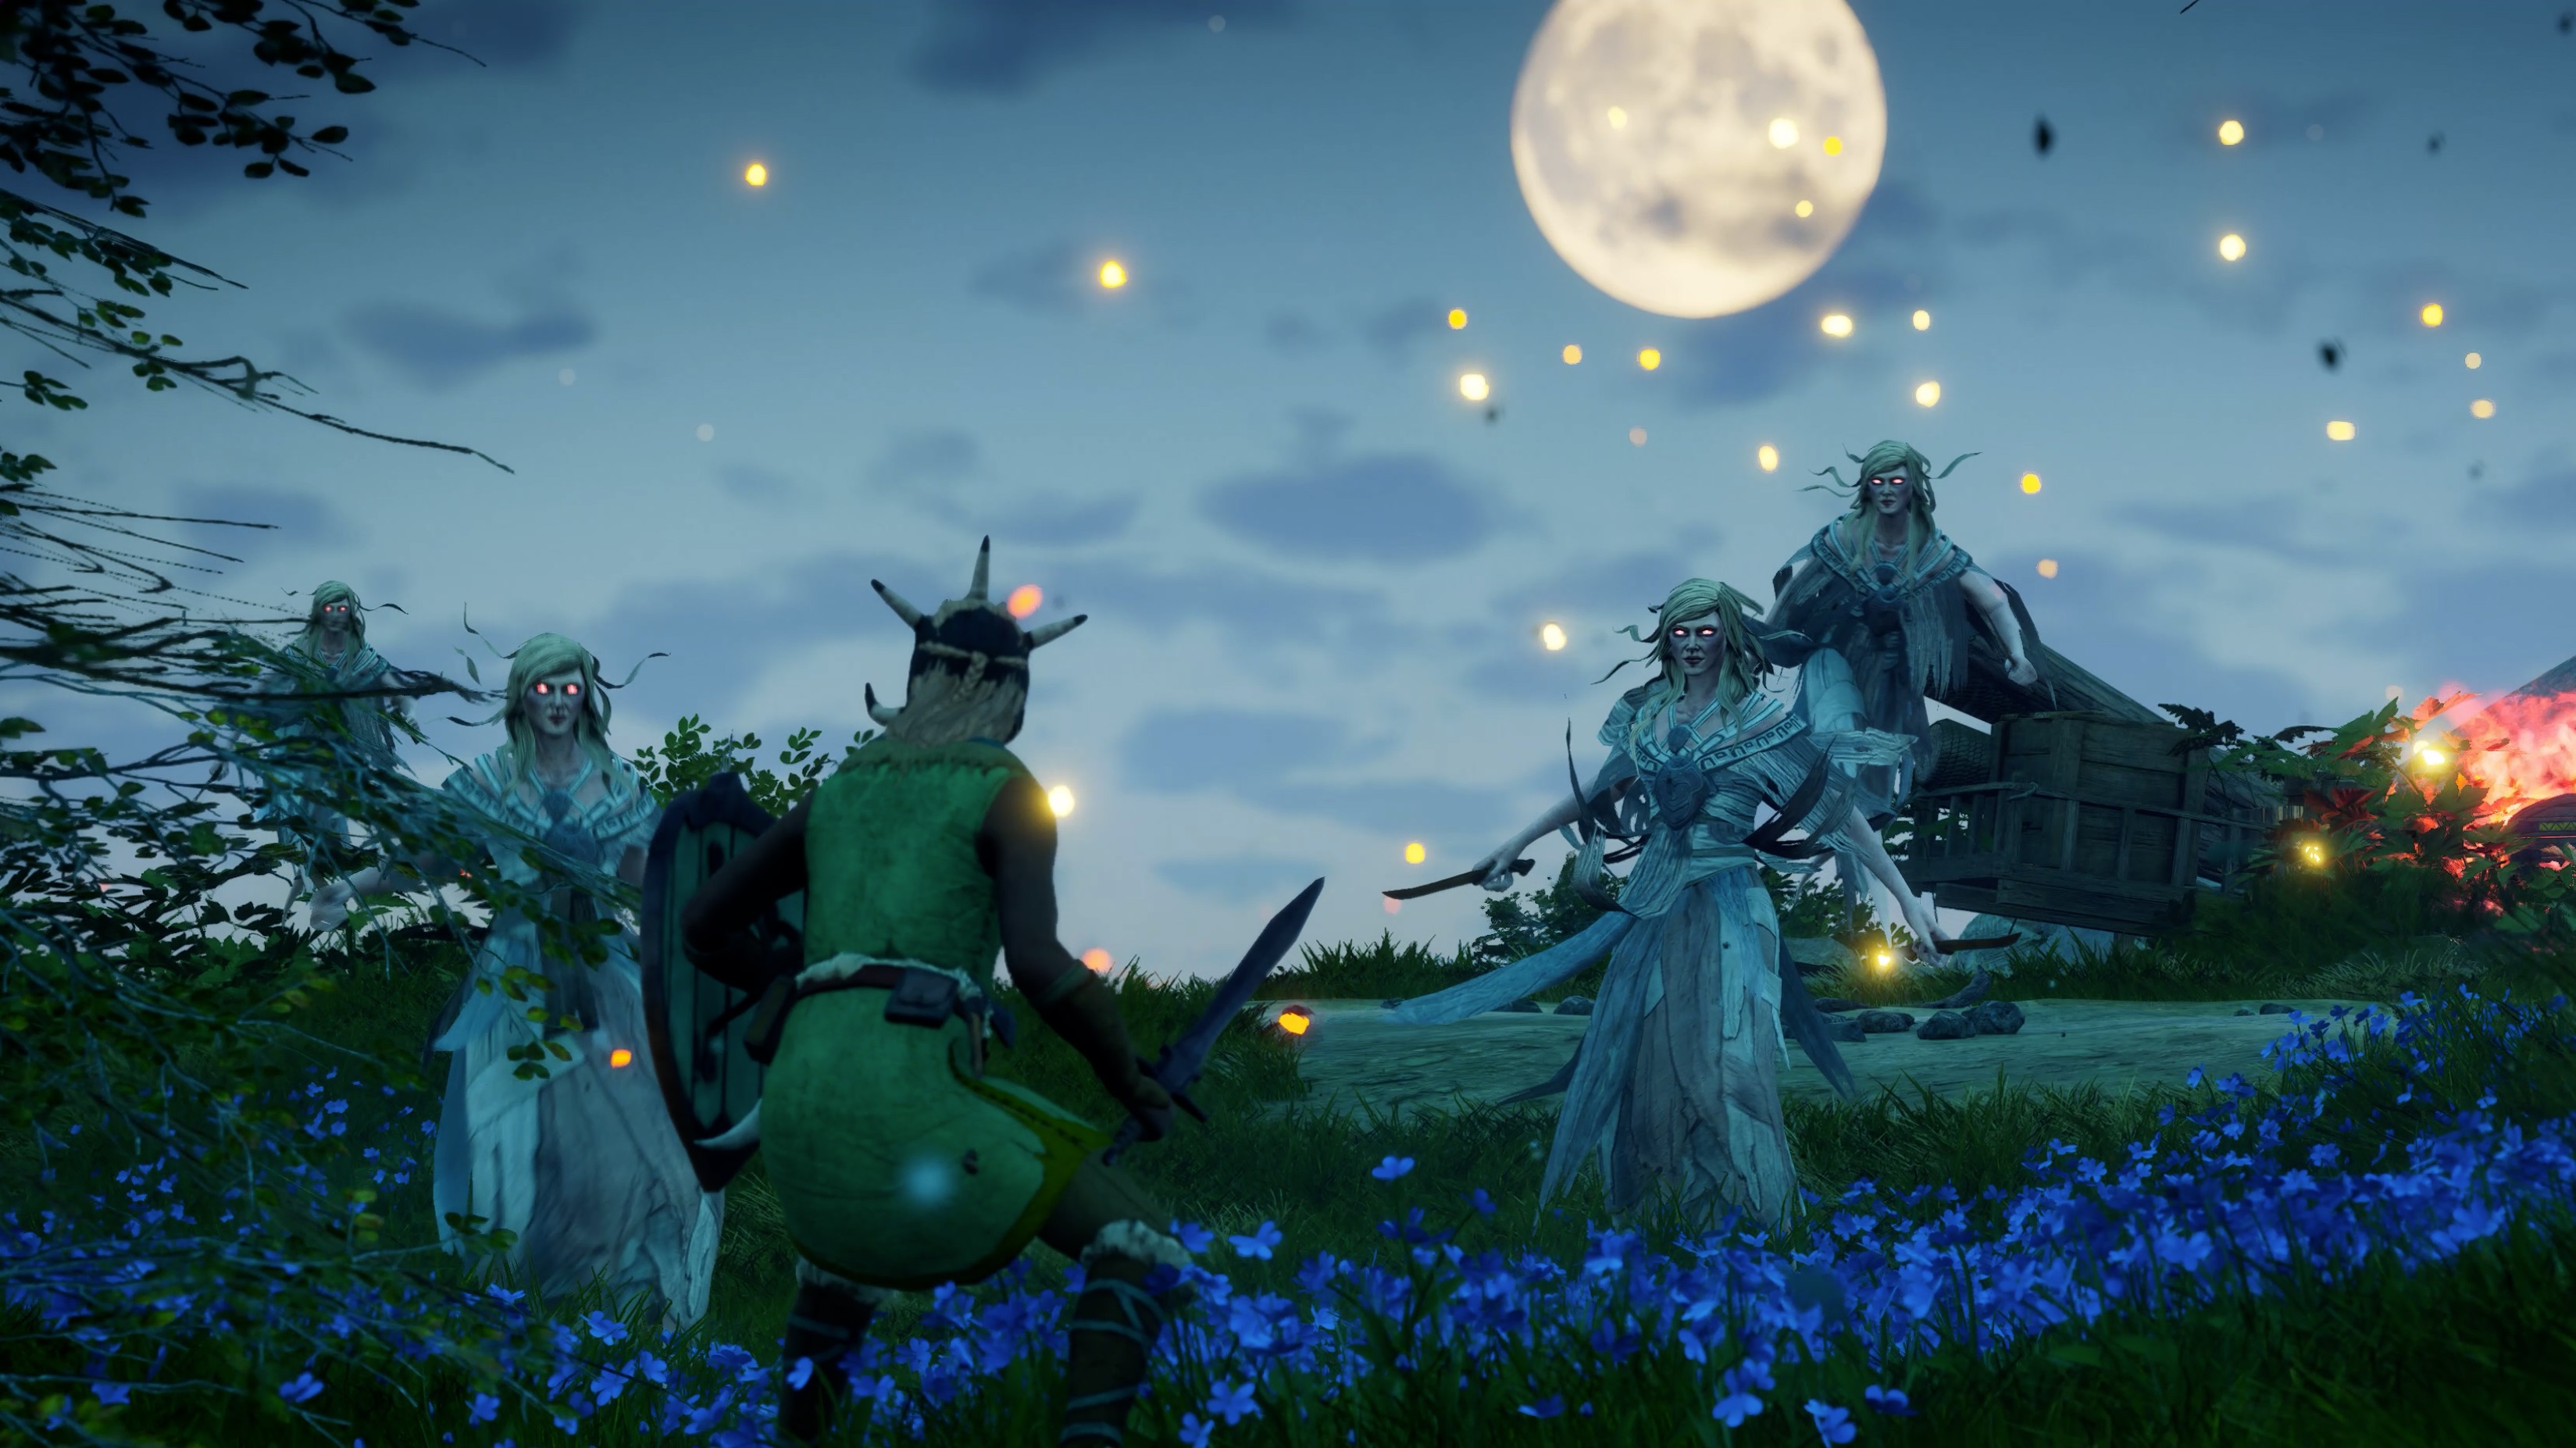 Ravenbound - a player stands with sword and shield ready facing several floating Vittra enemies wearing dresses and holding daggers beneath a full moon.